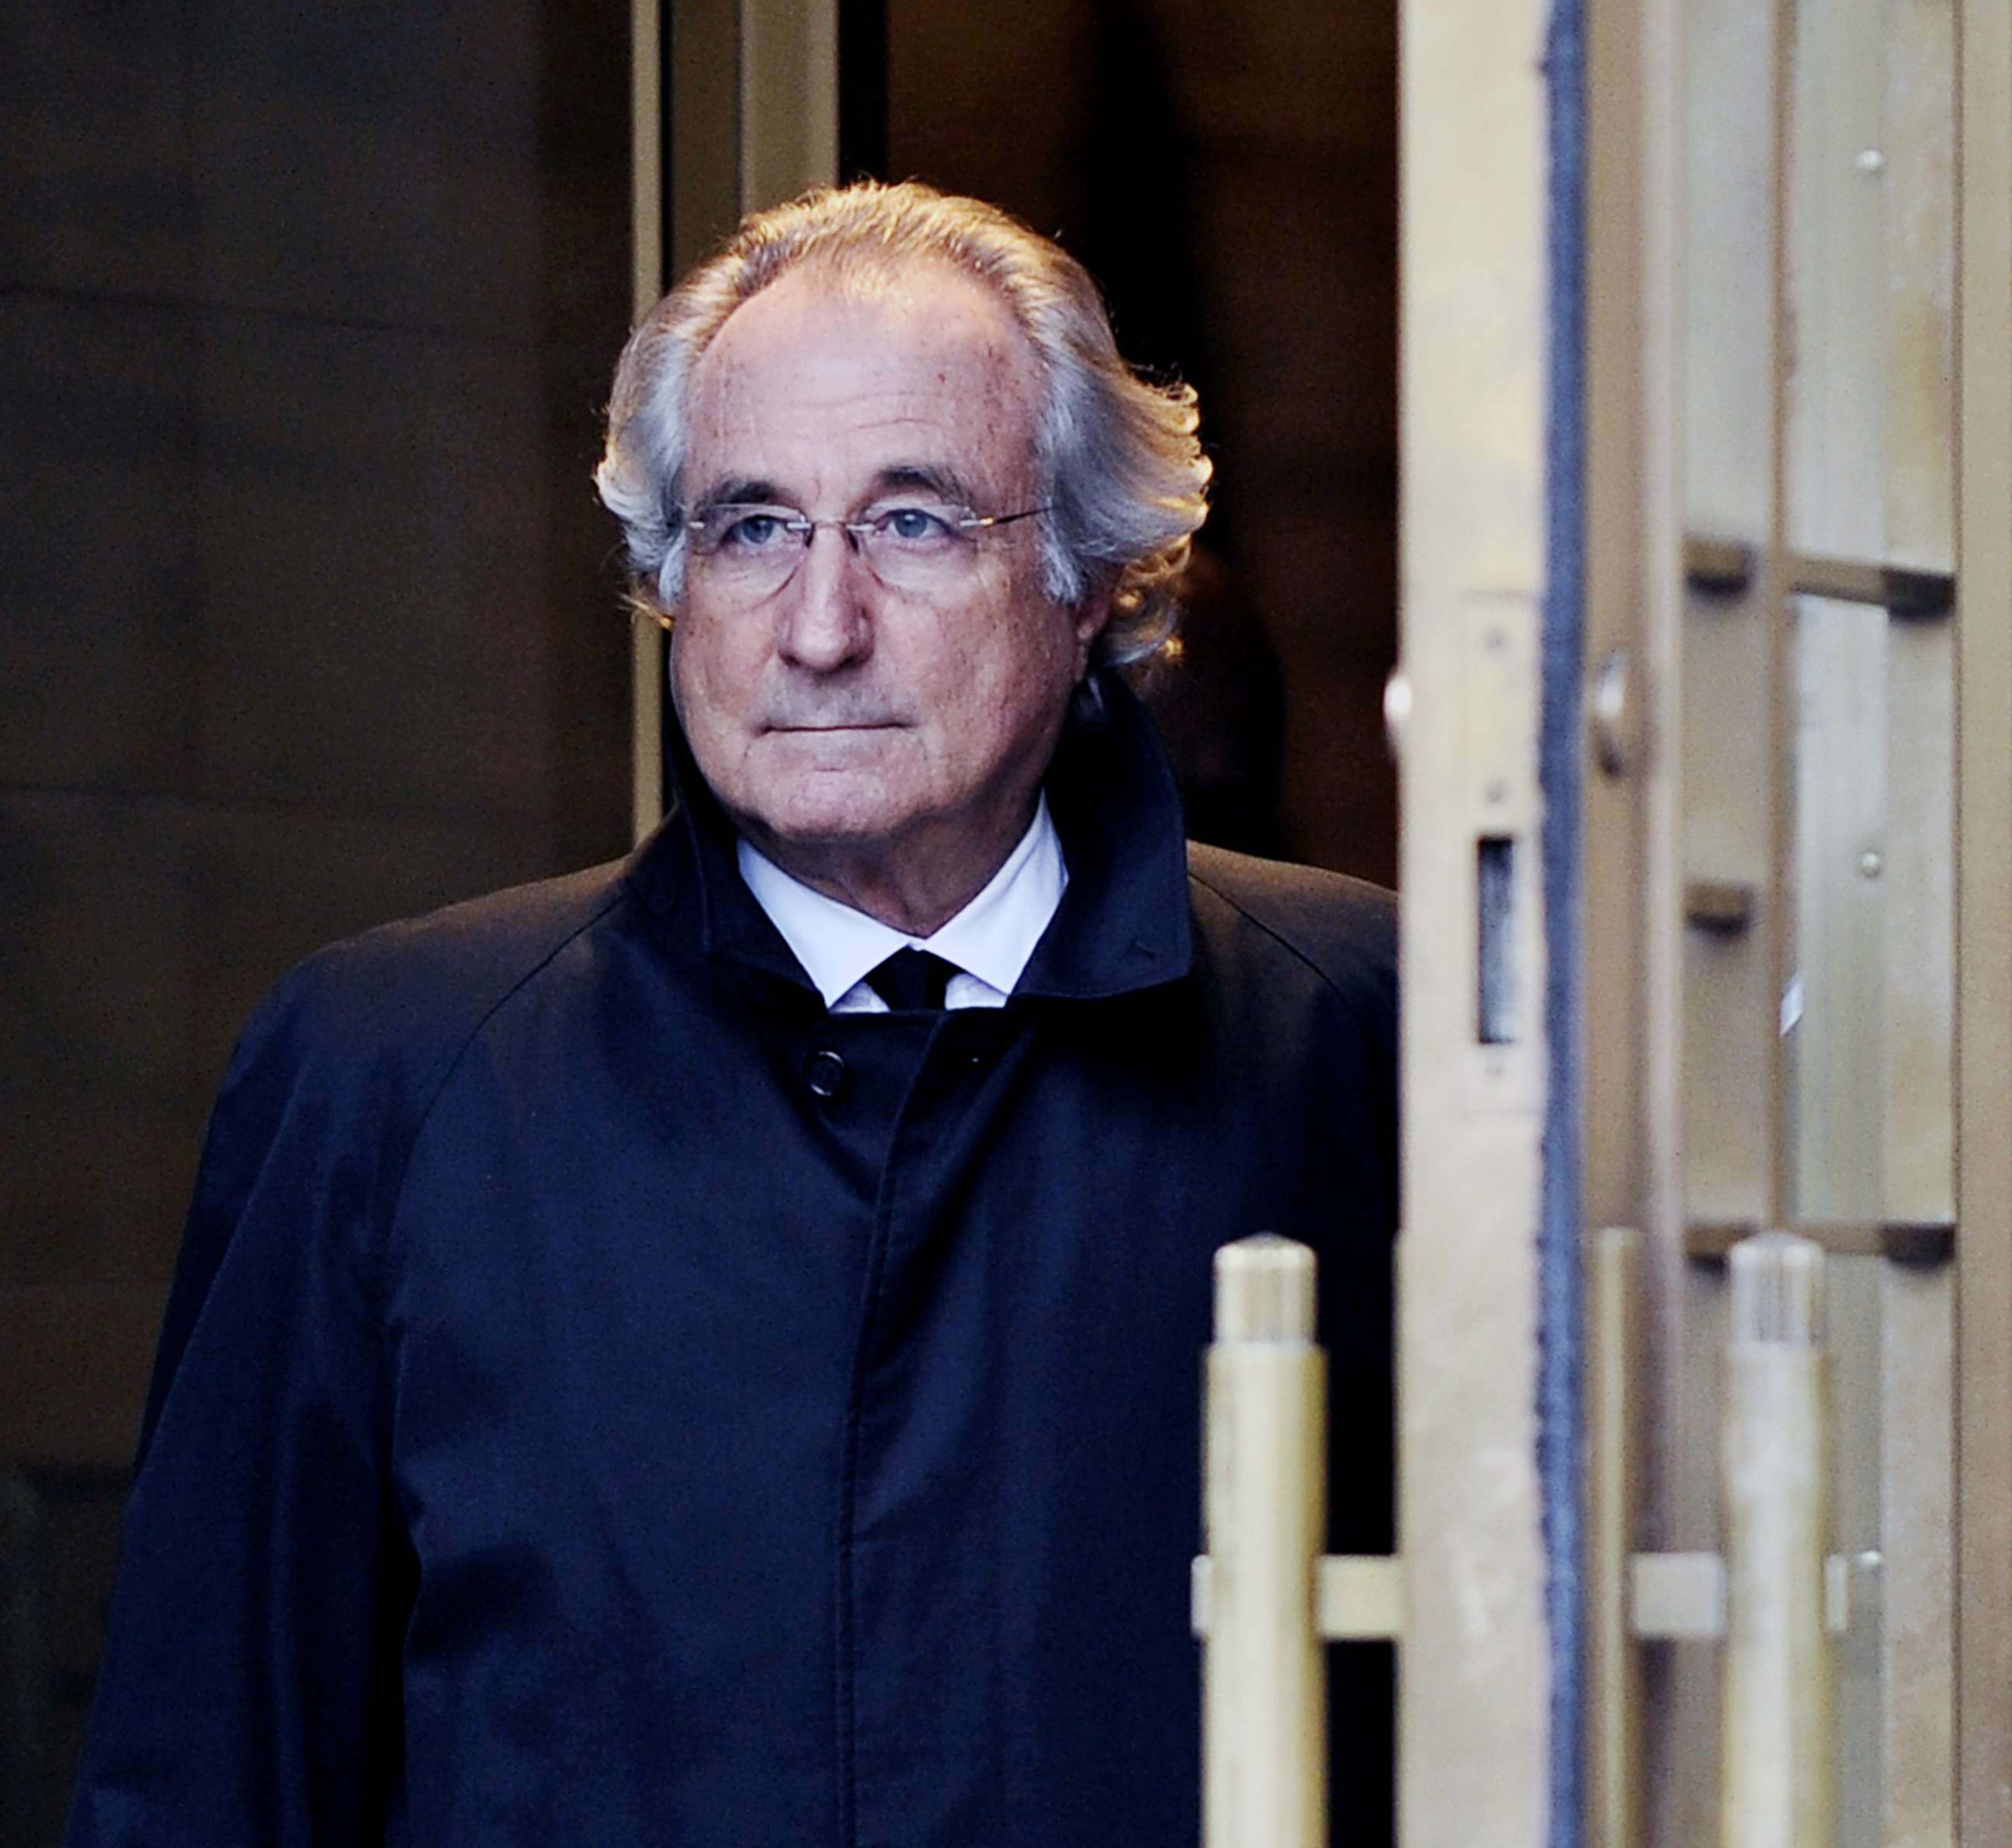 PHOTO: Bernard Madoff leaves US Federal Court after a hearing regarding his bail on Jan. 14, 2009 in N.Y.